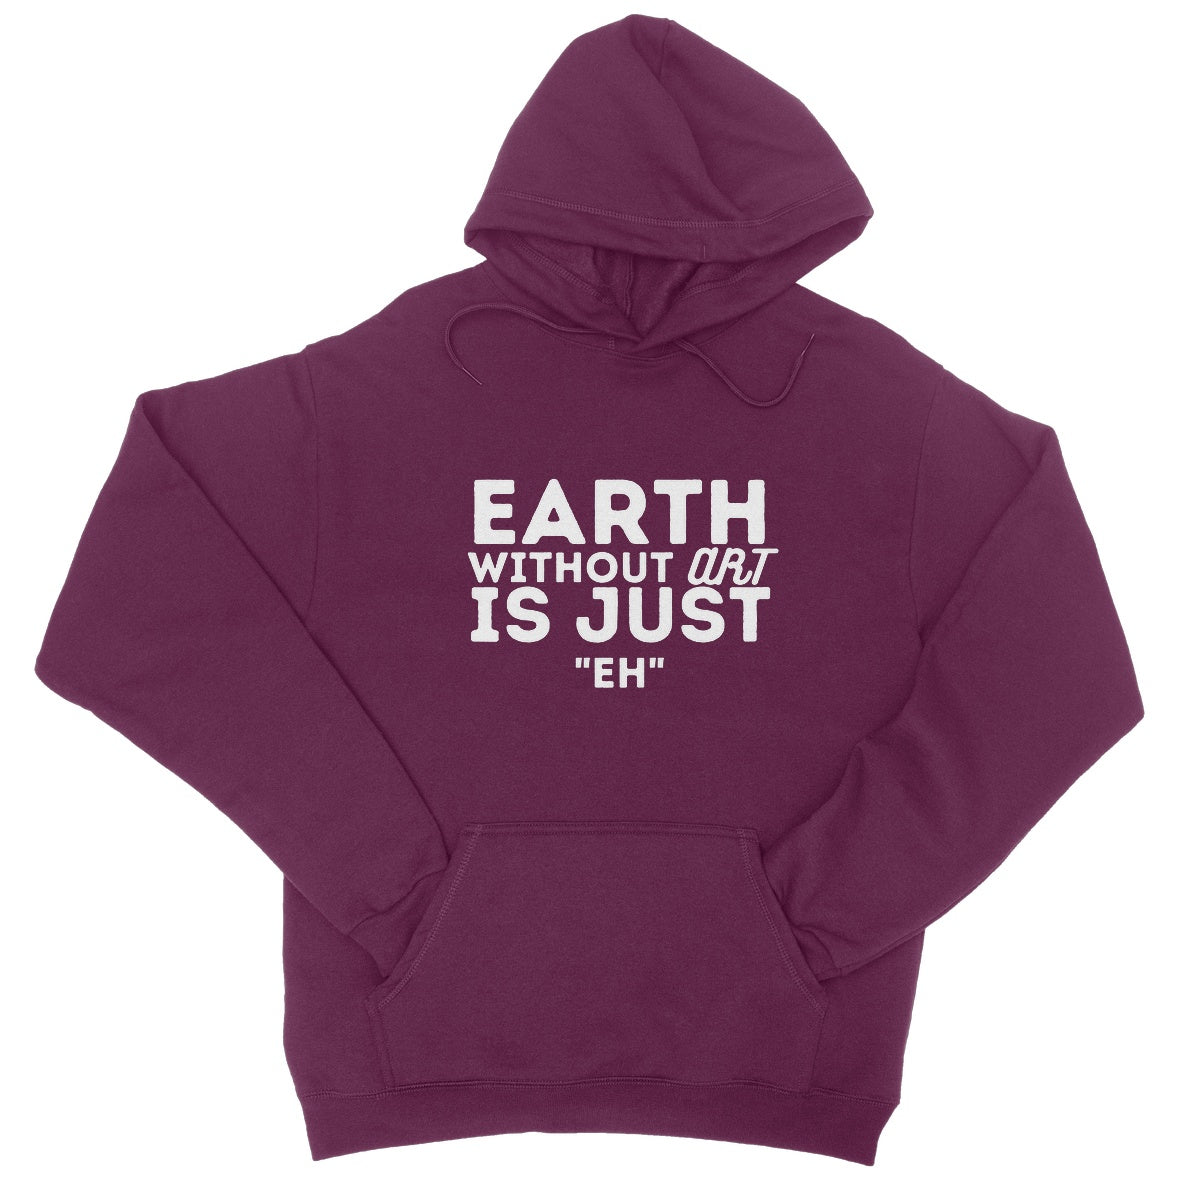 earth without art is just eh hoodie purple